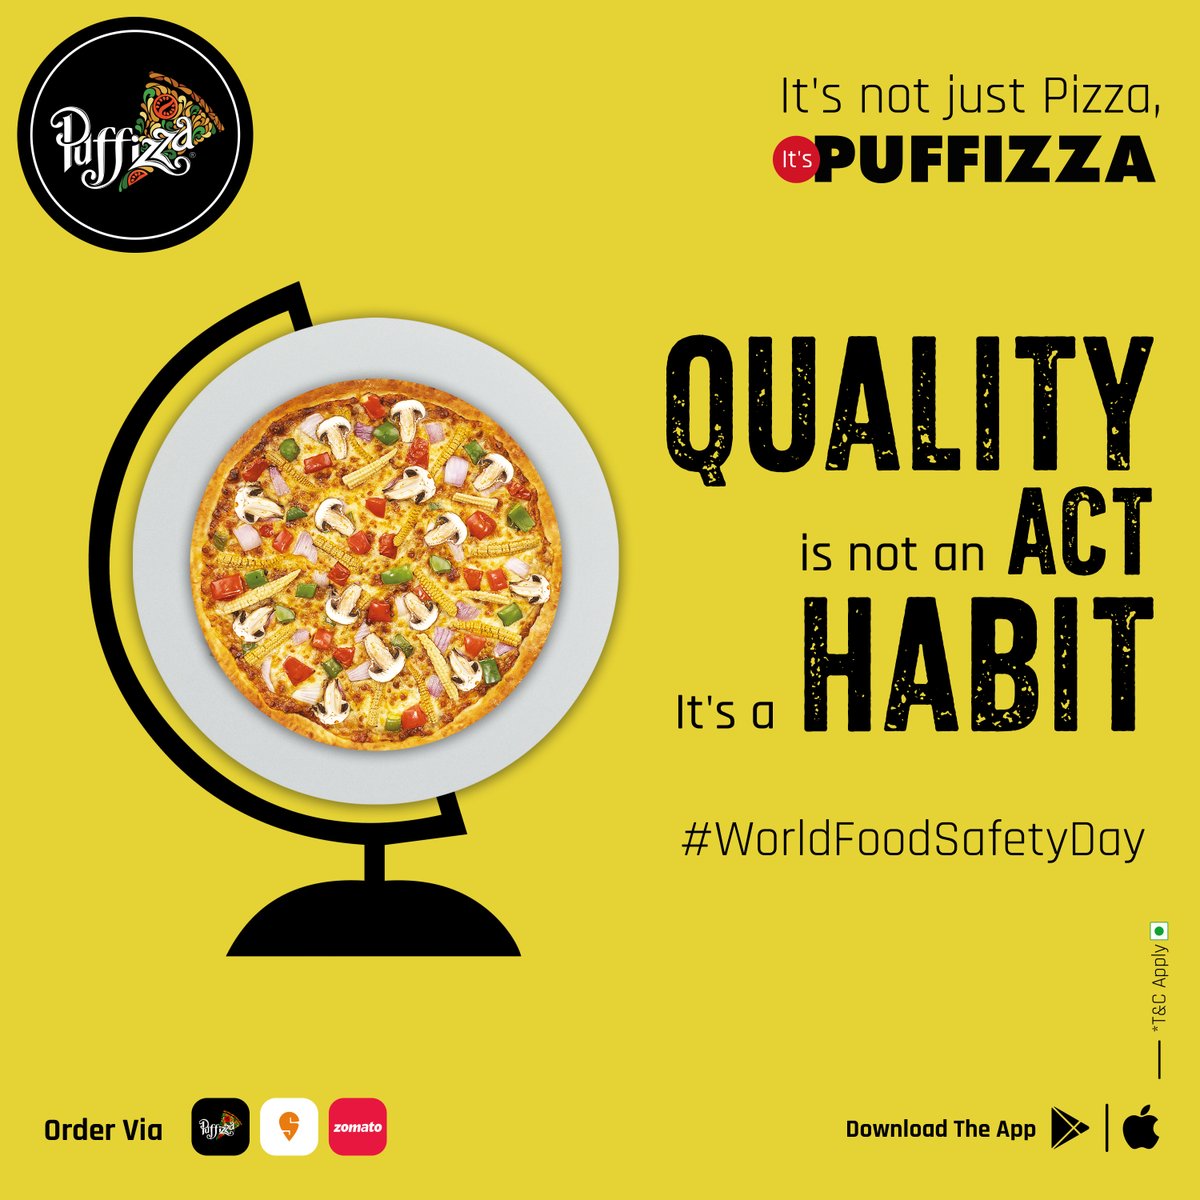 Delicious taste of our #food🍕, always comes with great safety & hygiene.

Happy #WorldFoodSafetyDay!

#SaferFoodBetterHealth #happyworldfoodsafetyday #worldfoodsafetyday2022 #foodsafetyday #foodsafetyday2022 #foodsafety #foods #foodie #foodies #healthyfood #tastyfood #puffizza